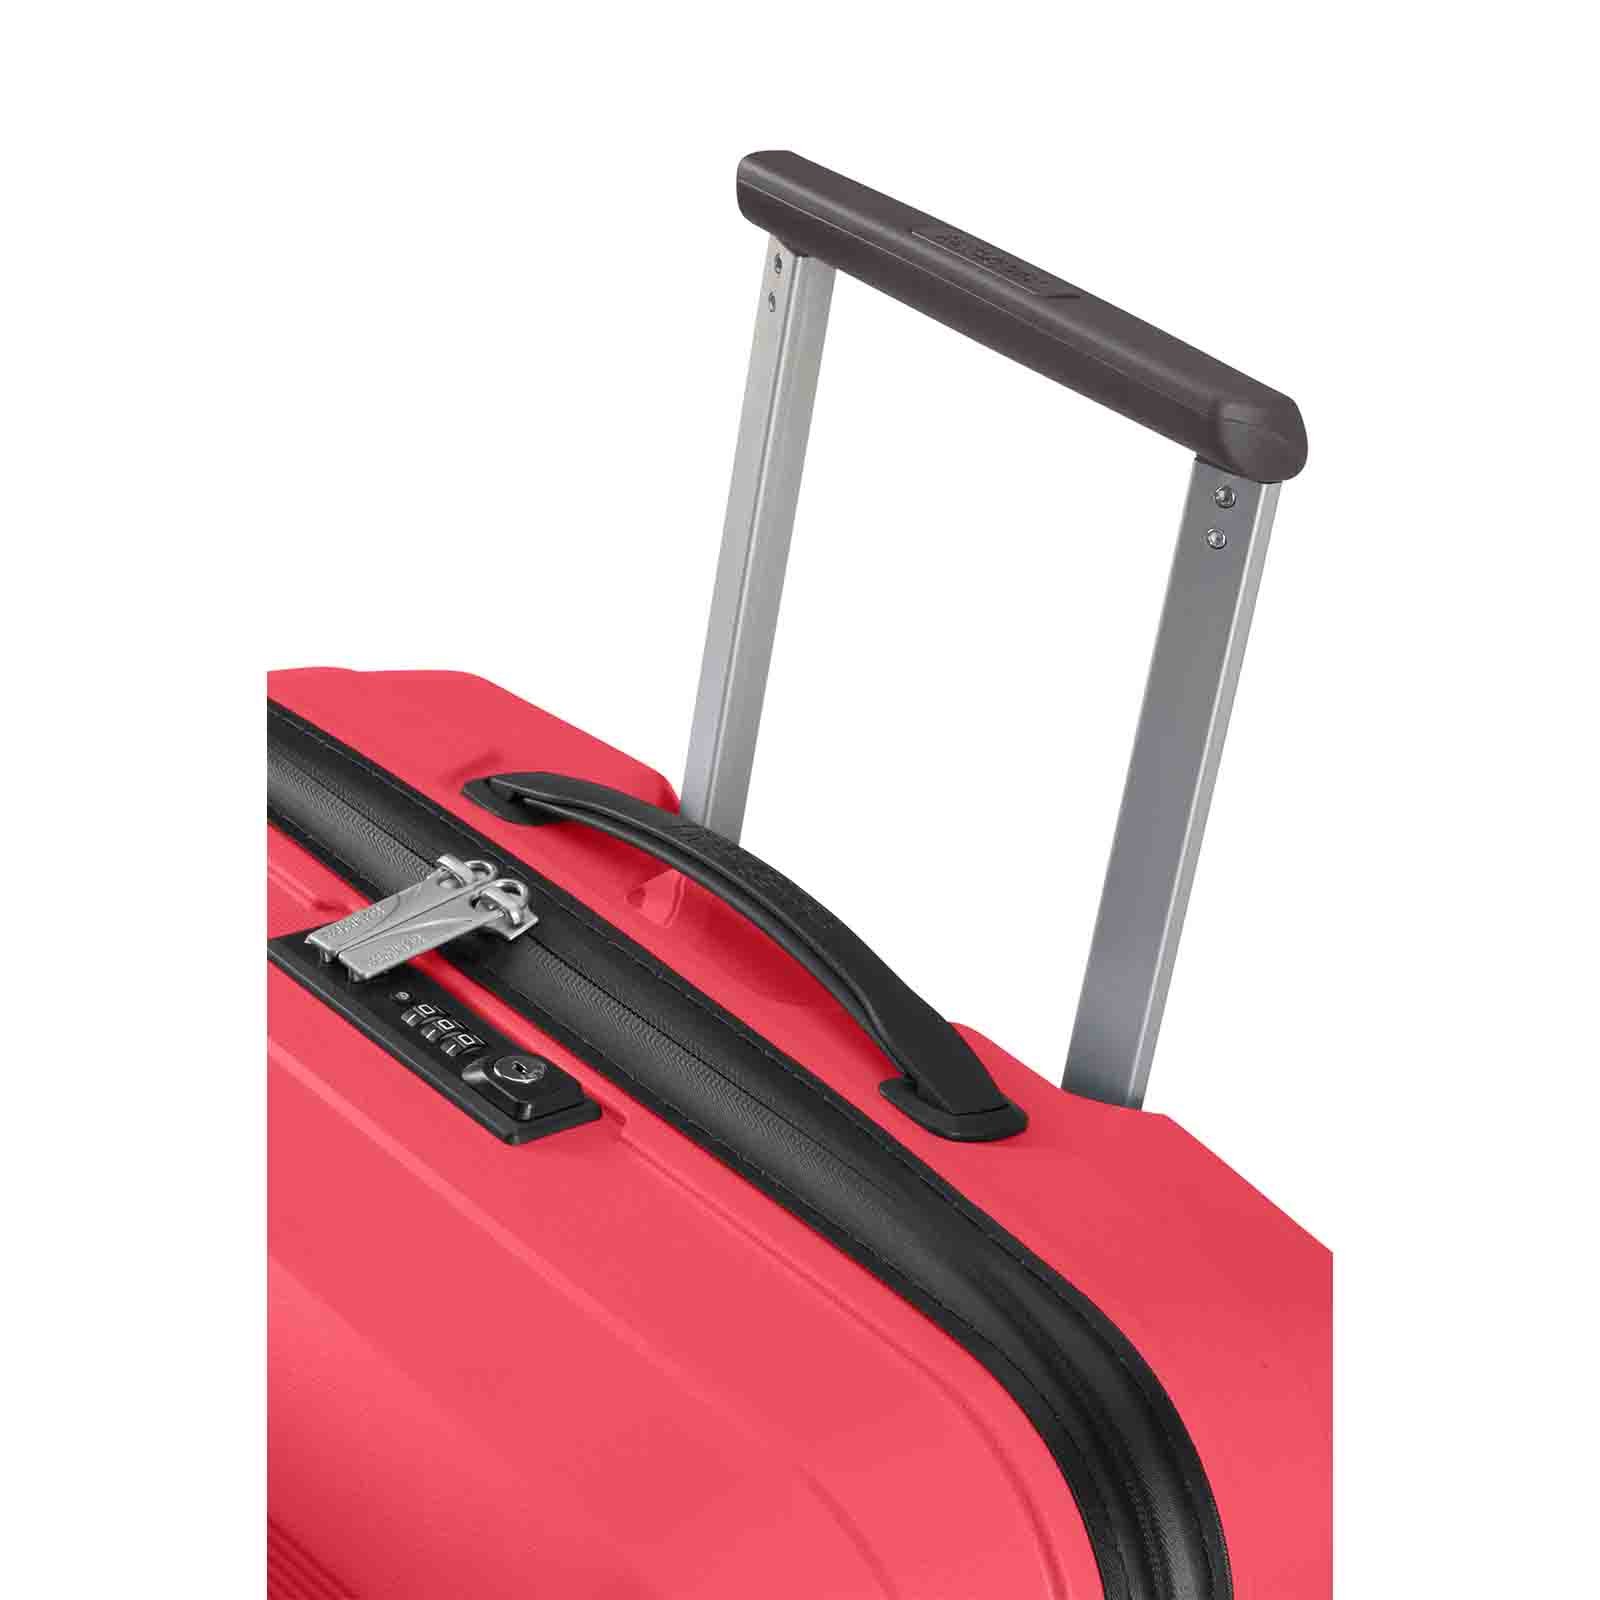 American-Tourister-Airconic-67cm-Suitcase-Paradise-Pink-Handle